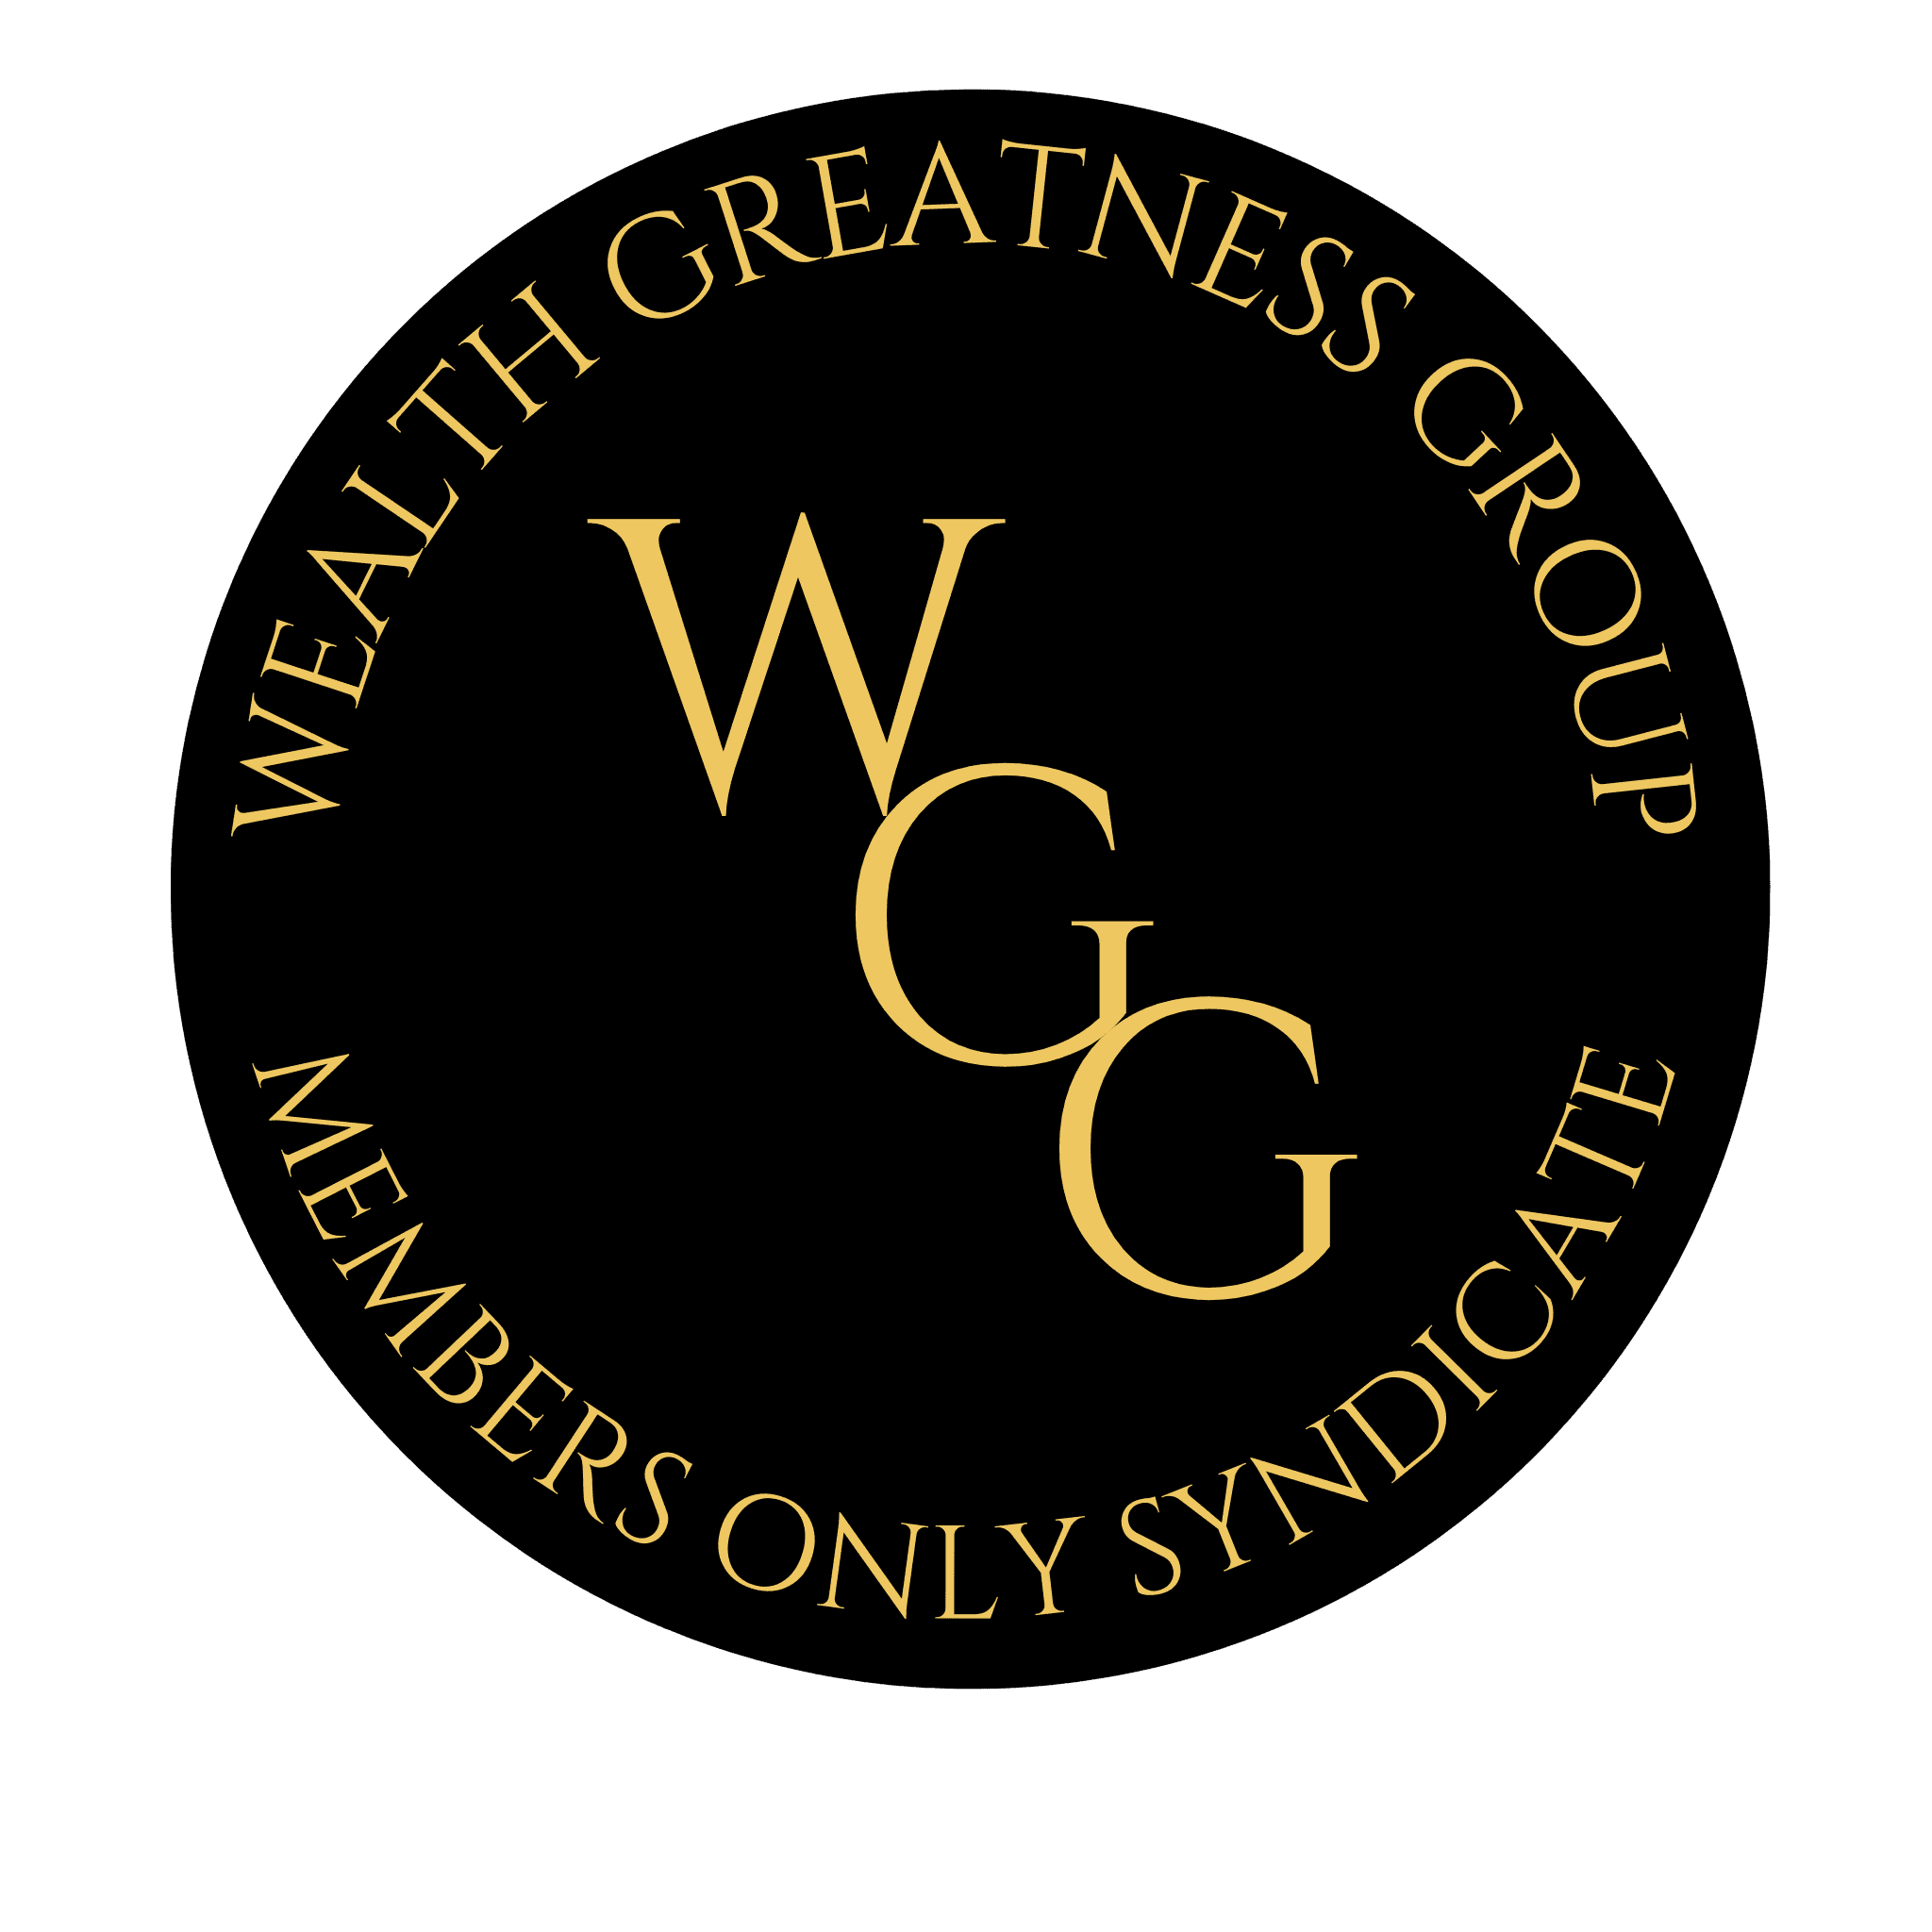 Wealth Greatness Group